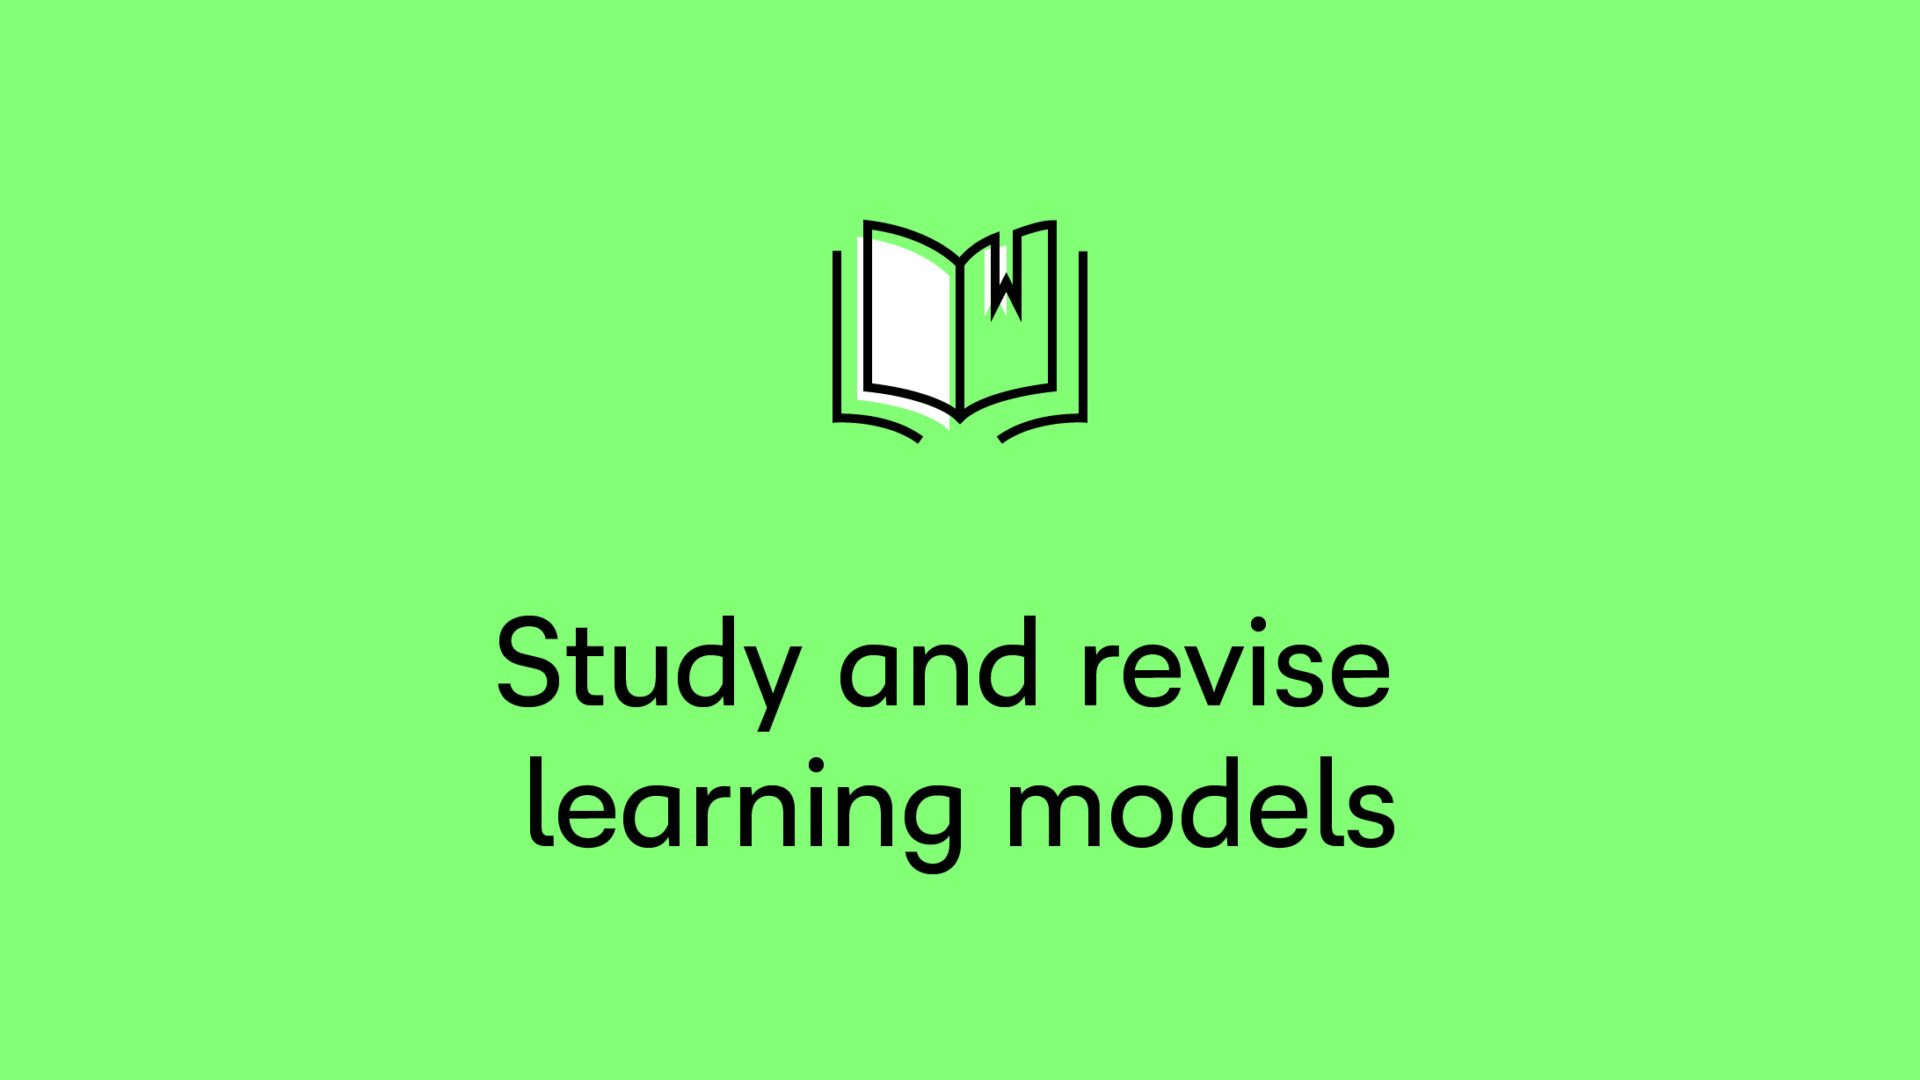 Study and revise learning models